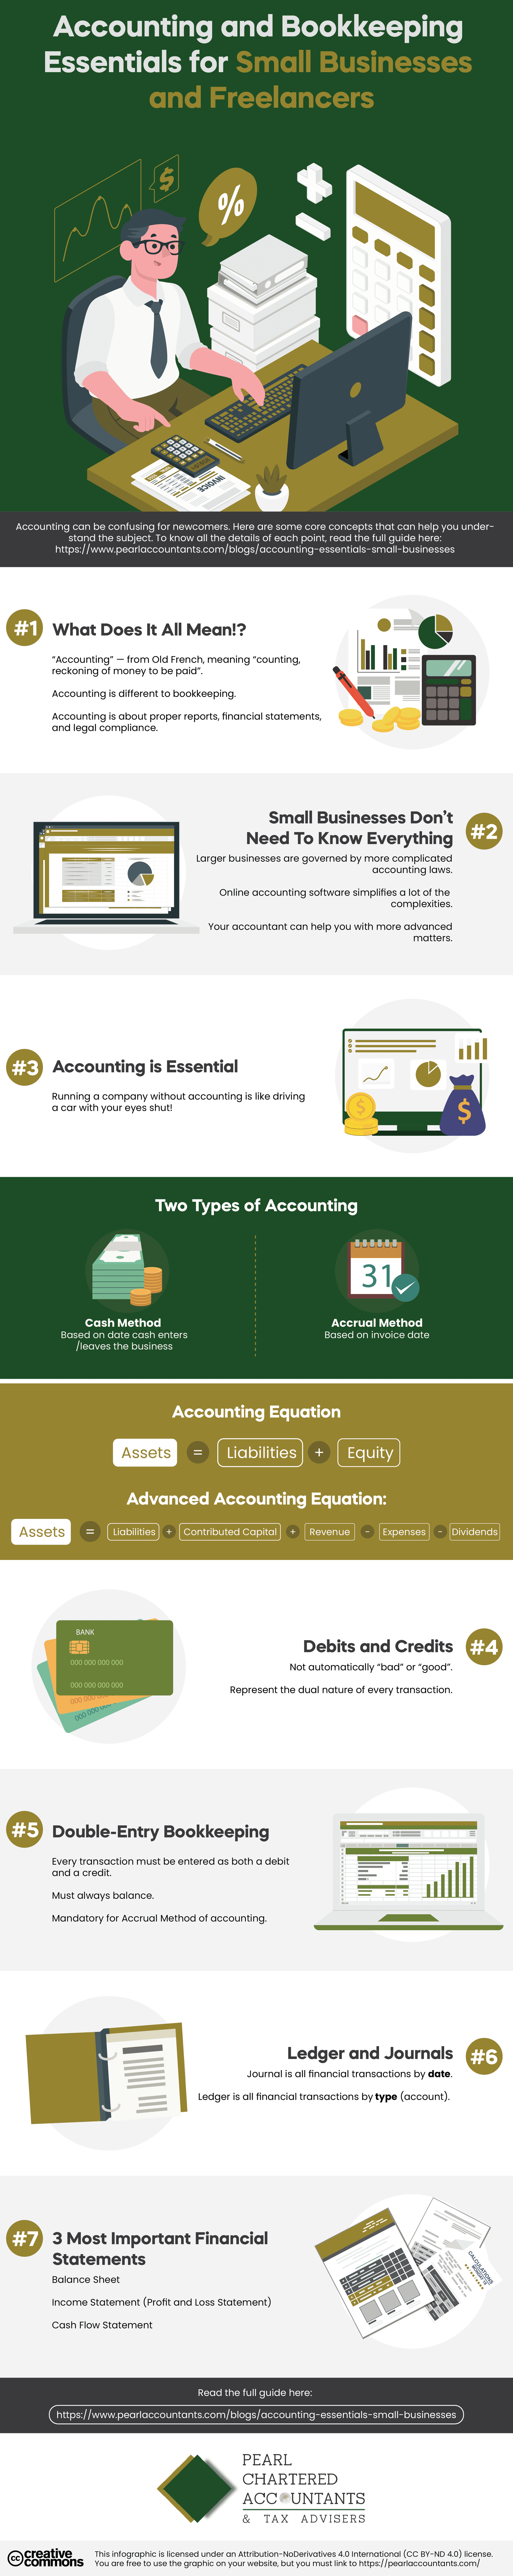 Accounting and Bookkeeping Essentials for Small Businesses and Freelancers